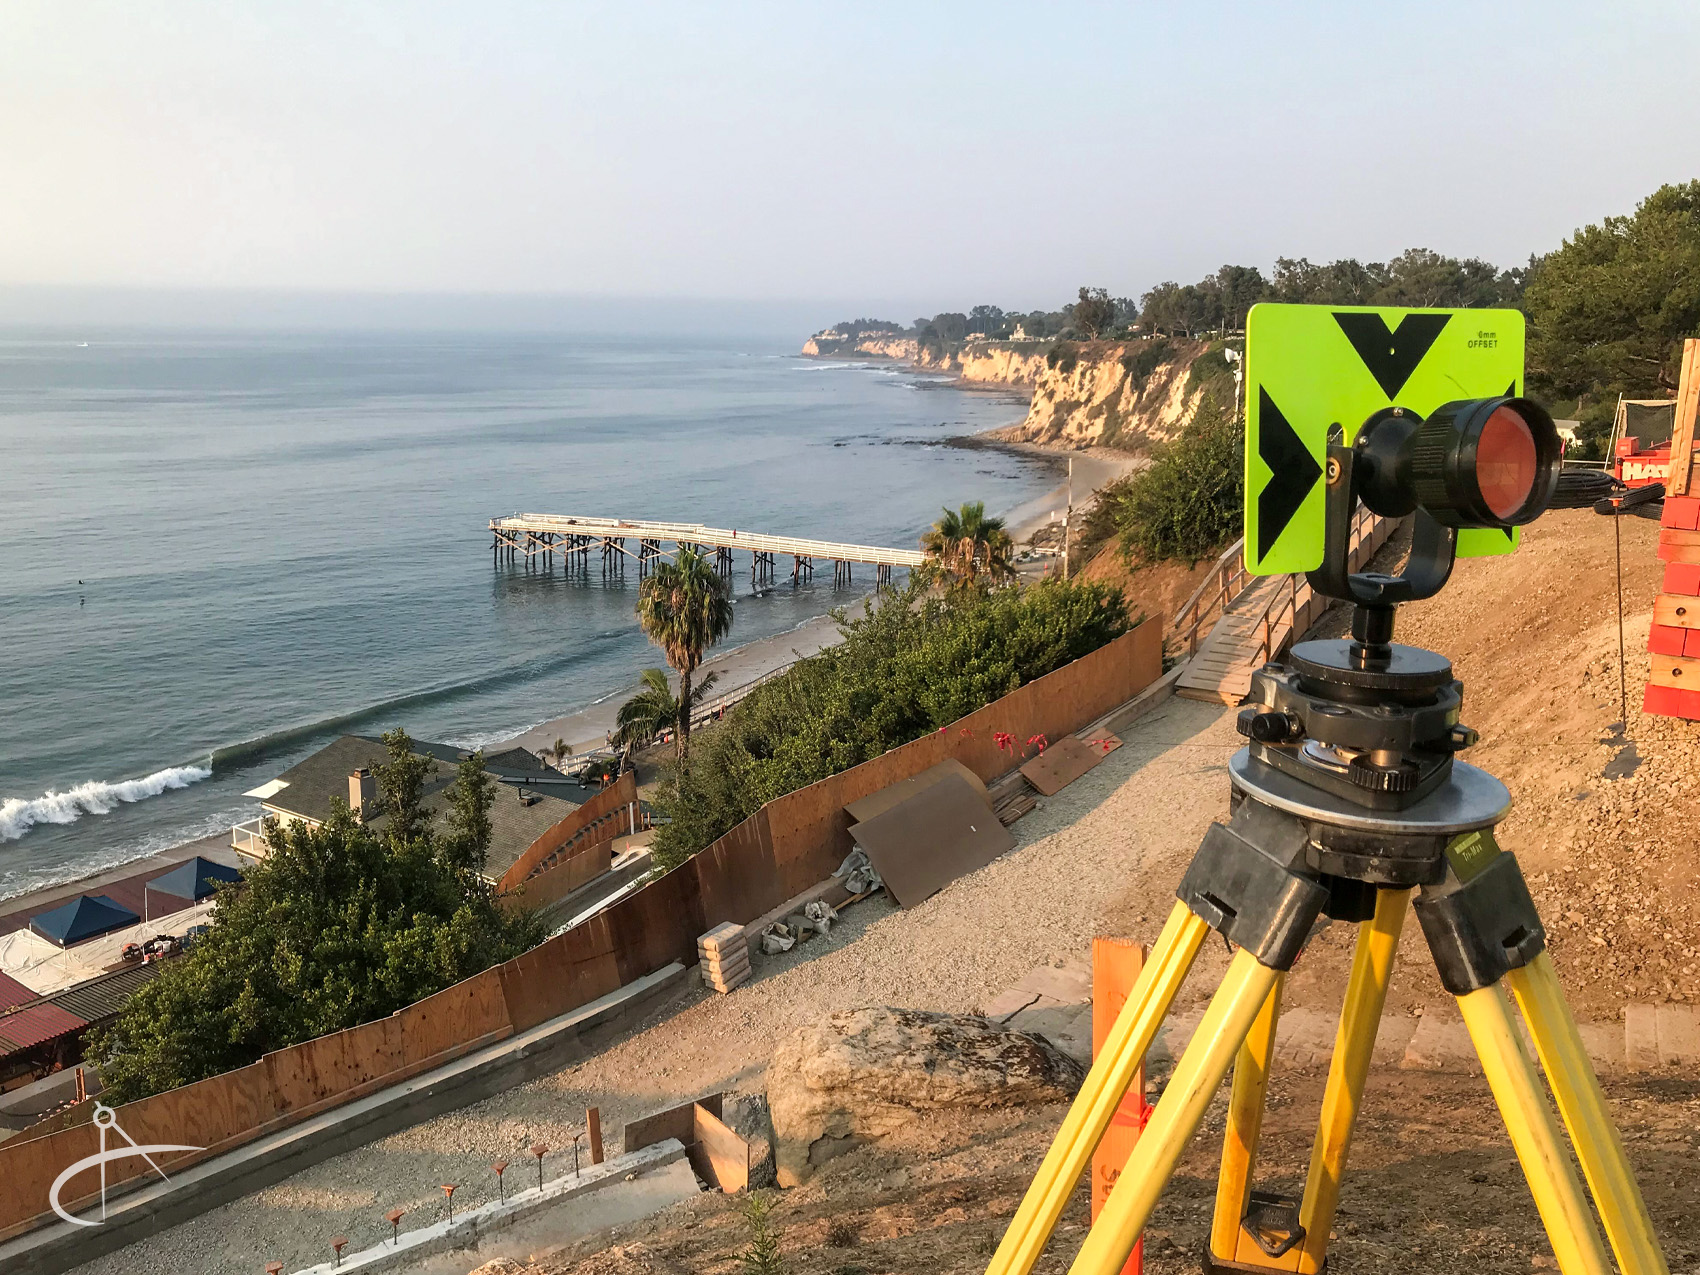 Back site prism setup on hill overlooking the ocean. 